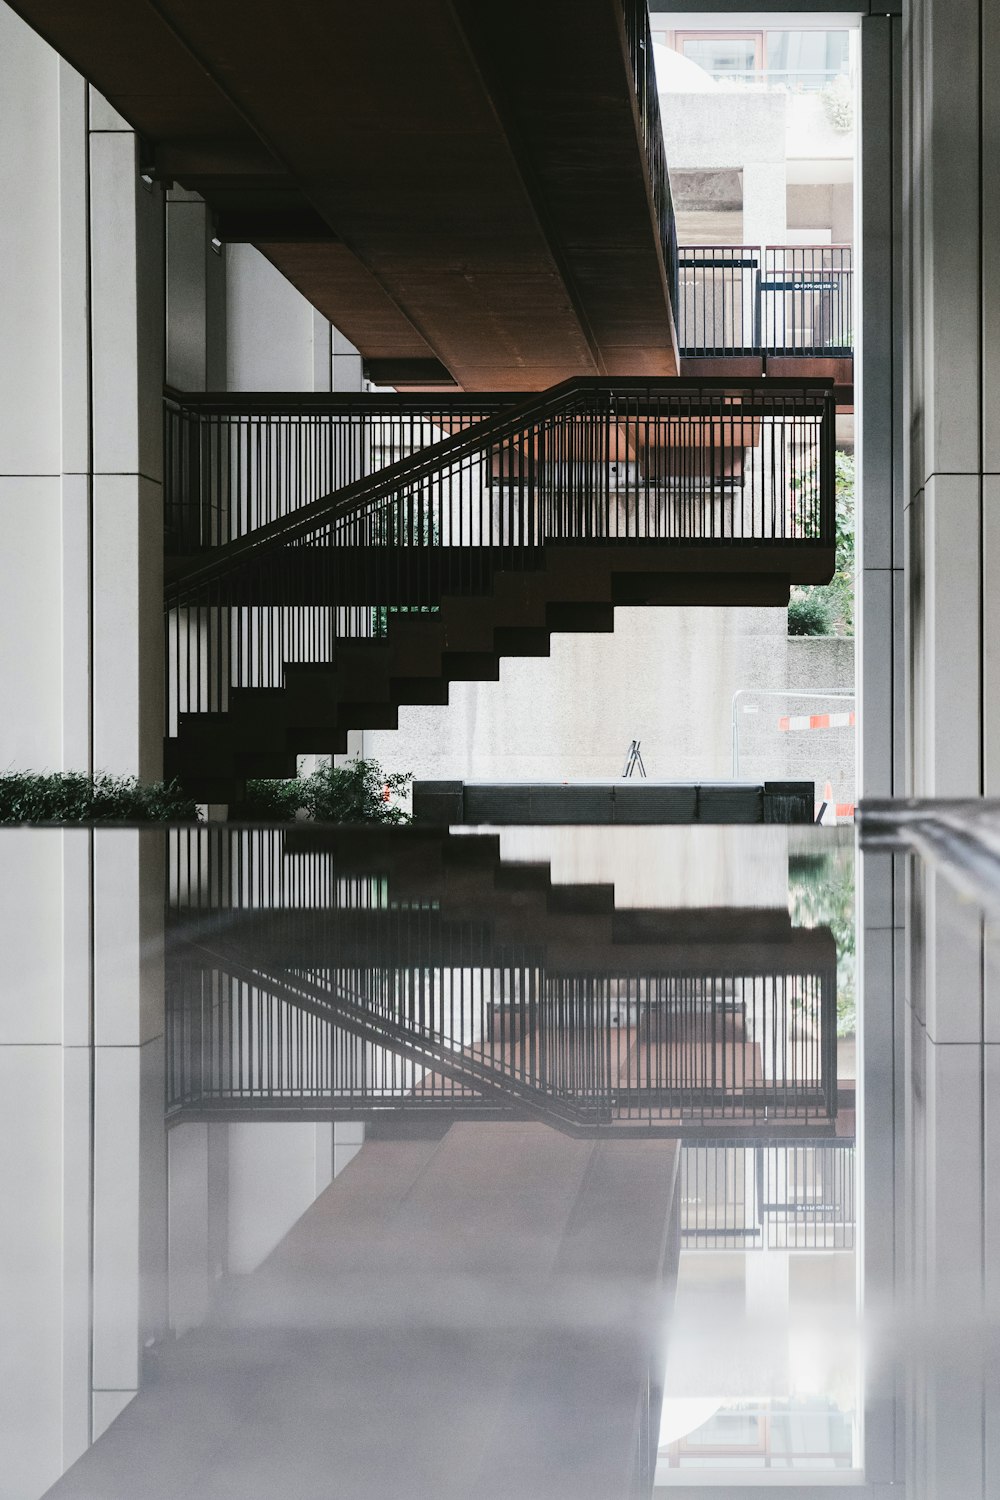 a stair case in a building with a reflection on the floor